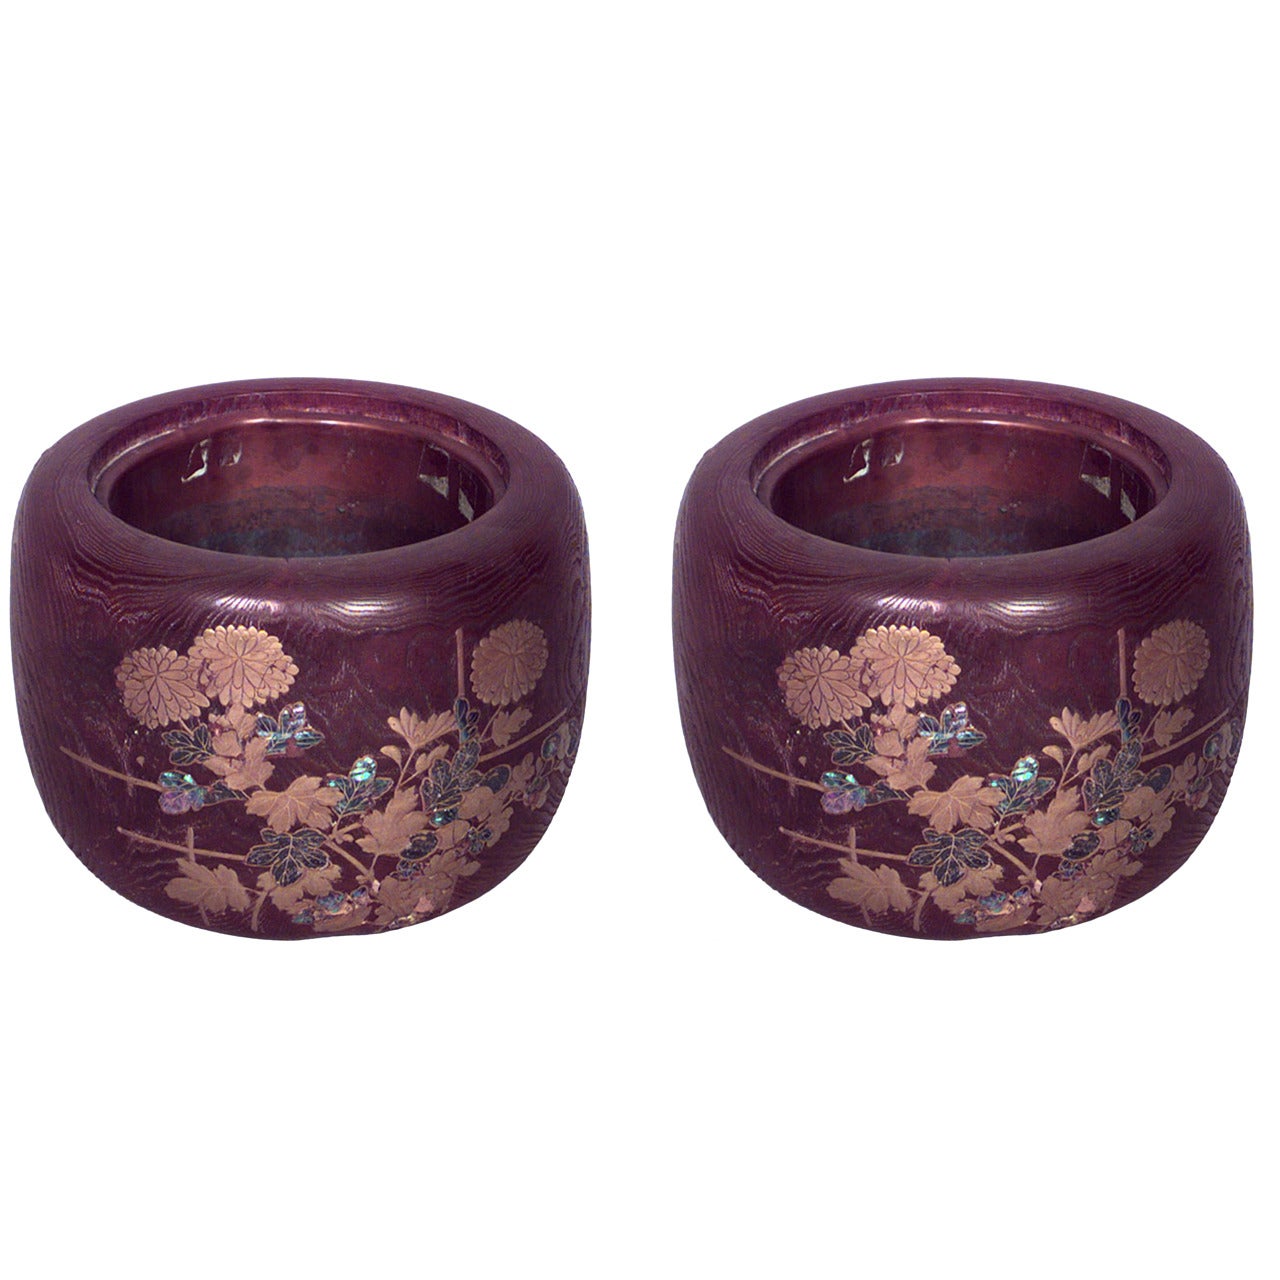 Pair of Japanese Lacquered Wood Inlaid Pots